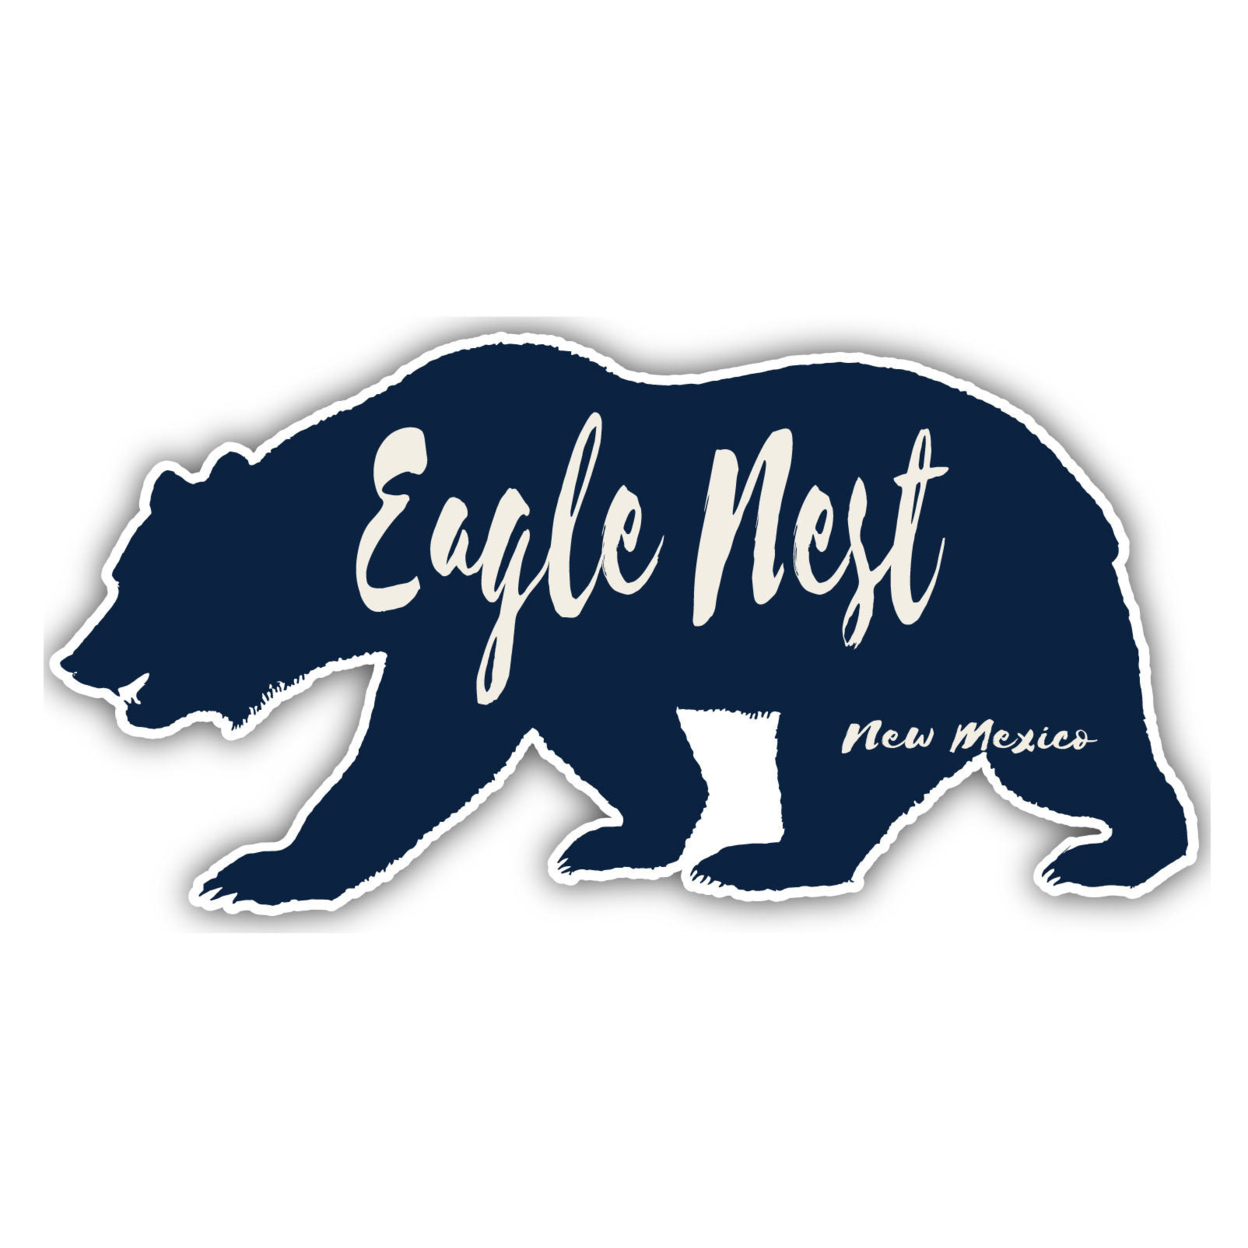 Eagle Nest New Mexico Souvenir Decorative Stickers (Choose Theme And Size) - 4-Pack, 6-Inch, Bear